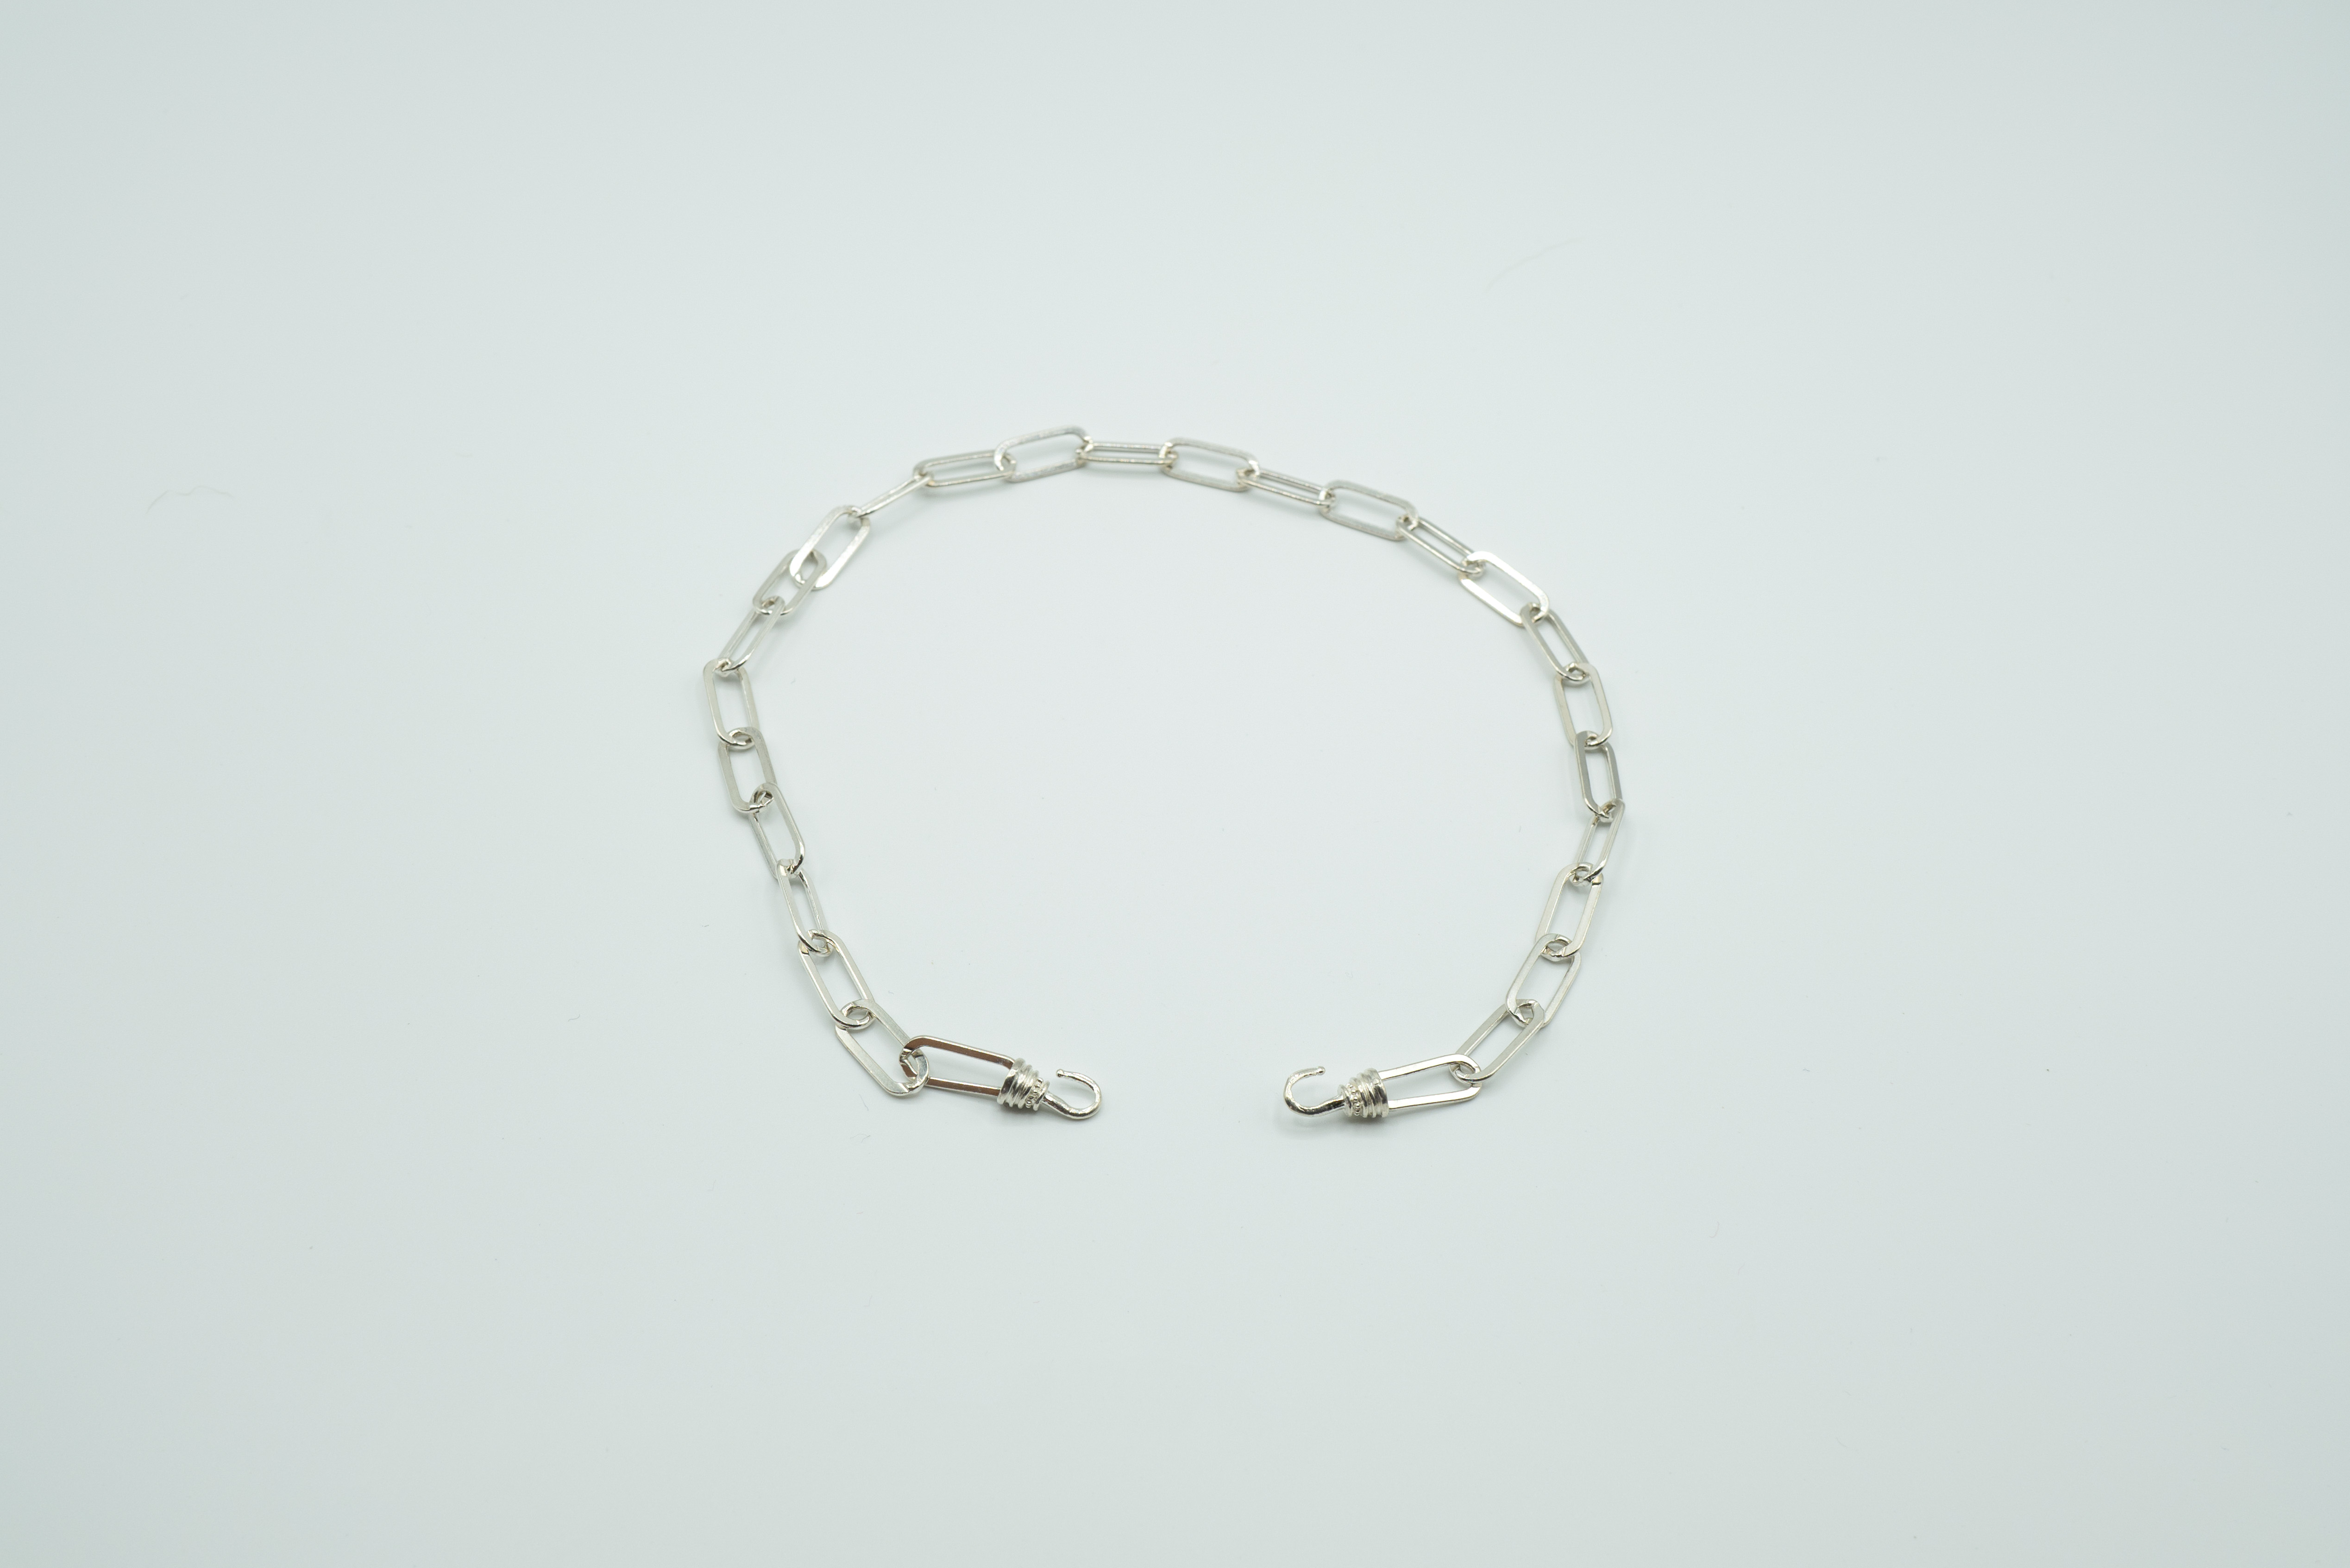 Long Oval Sterling Chain with Handmade Sterling Hooks